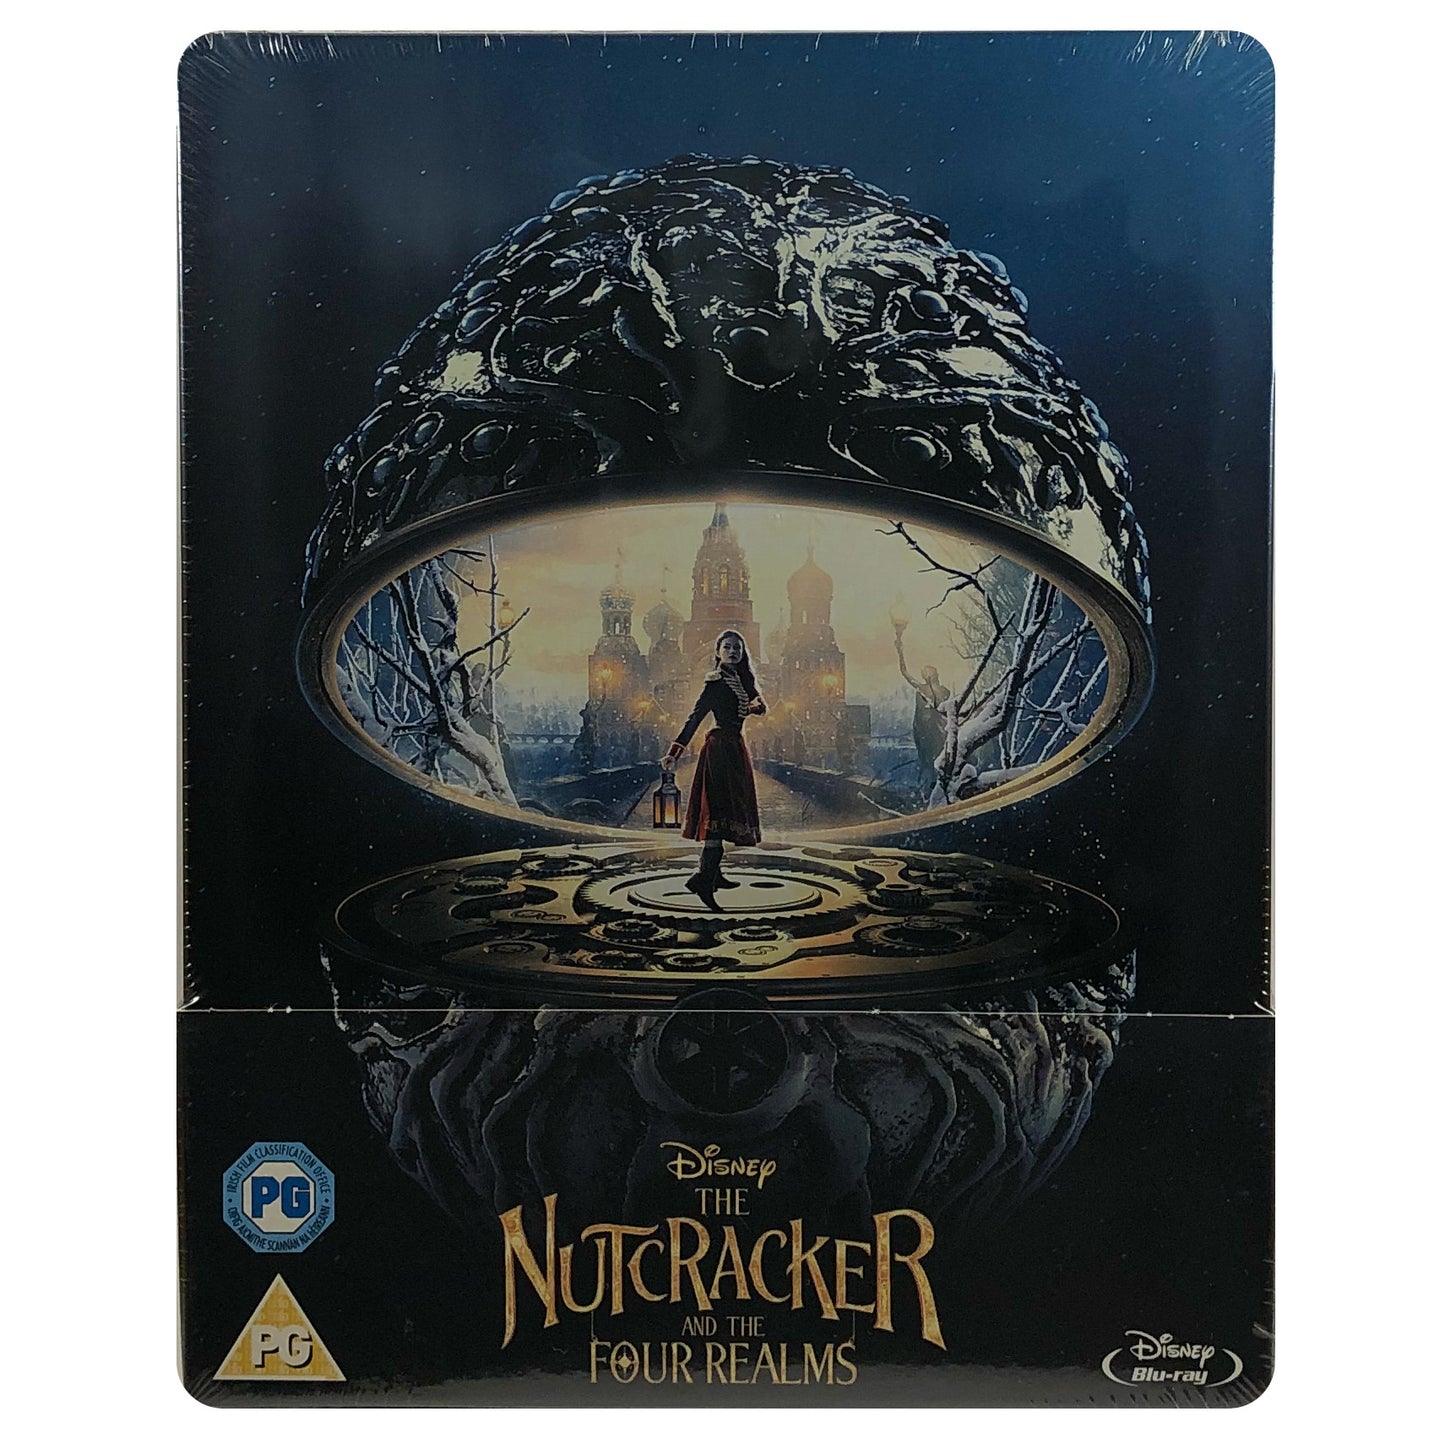 The Nutcracker and the Four Realms Blu-Ray Steelbook